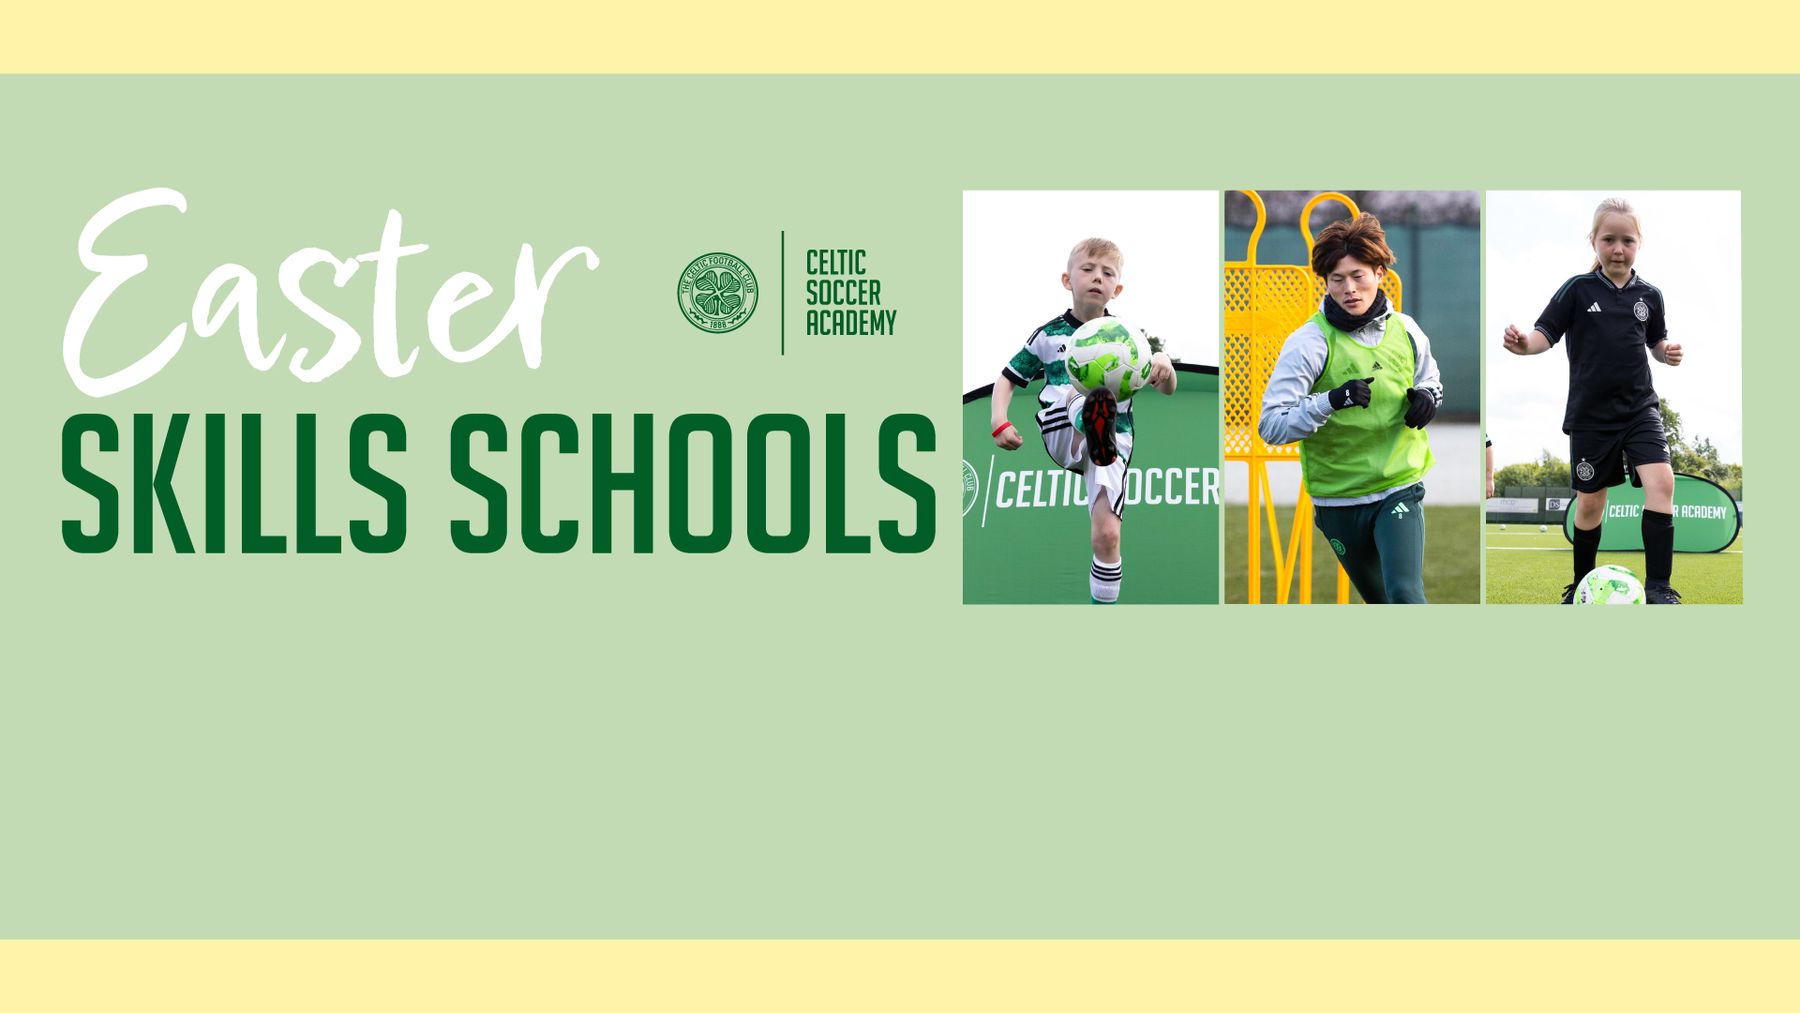 Book online now for Easter Skills Schools with Celtic Soccer Academy